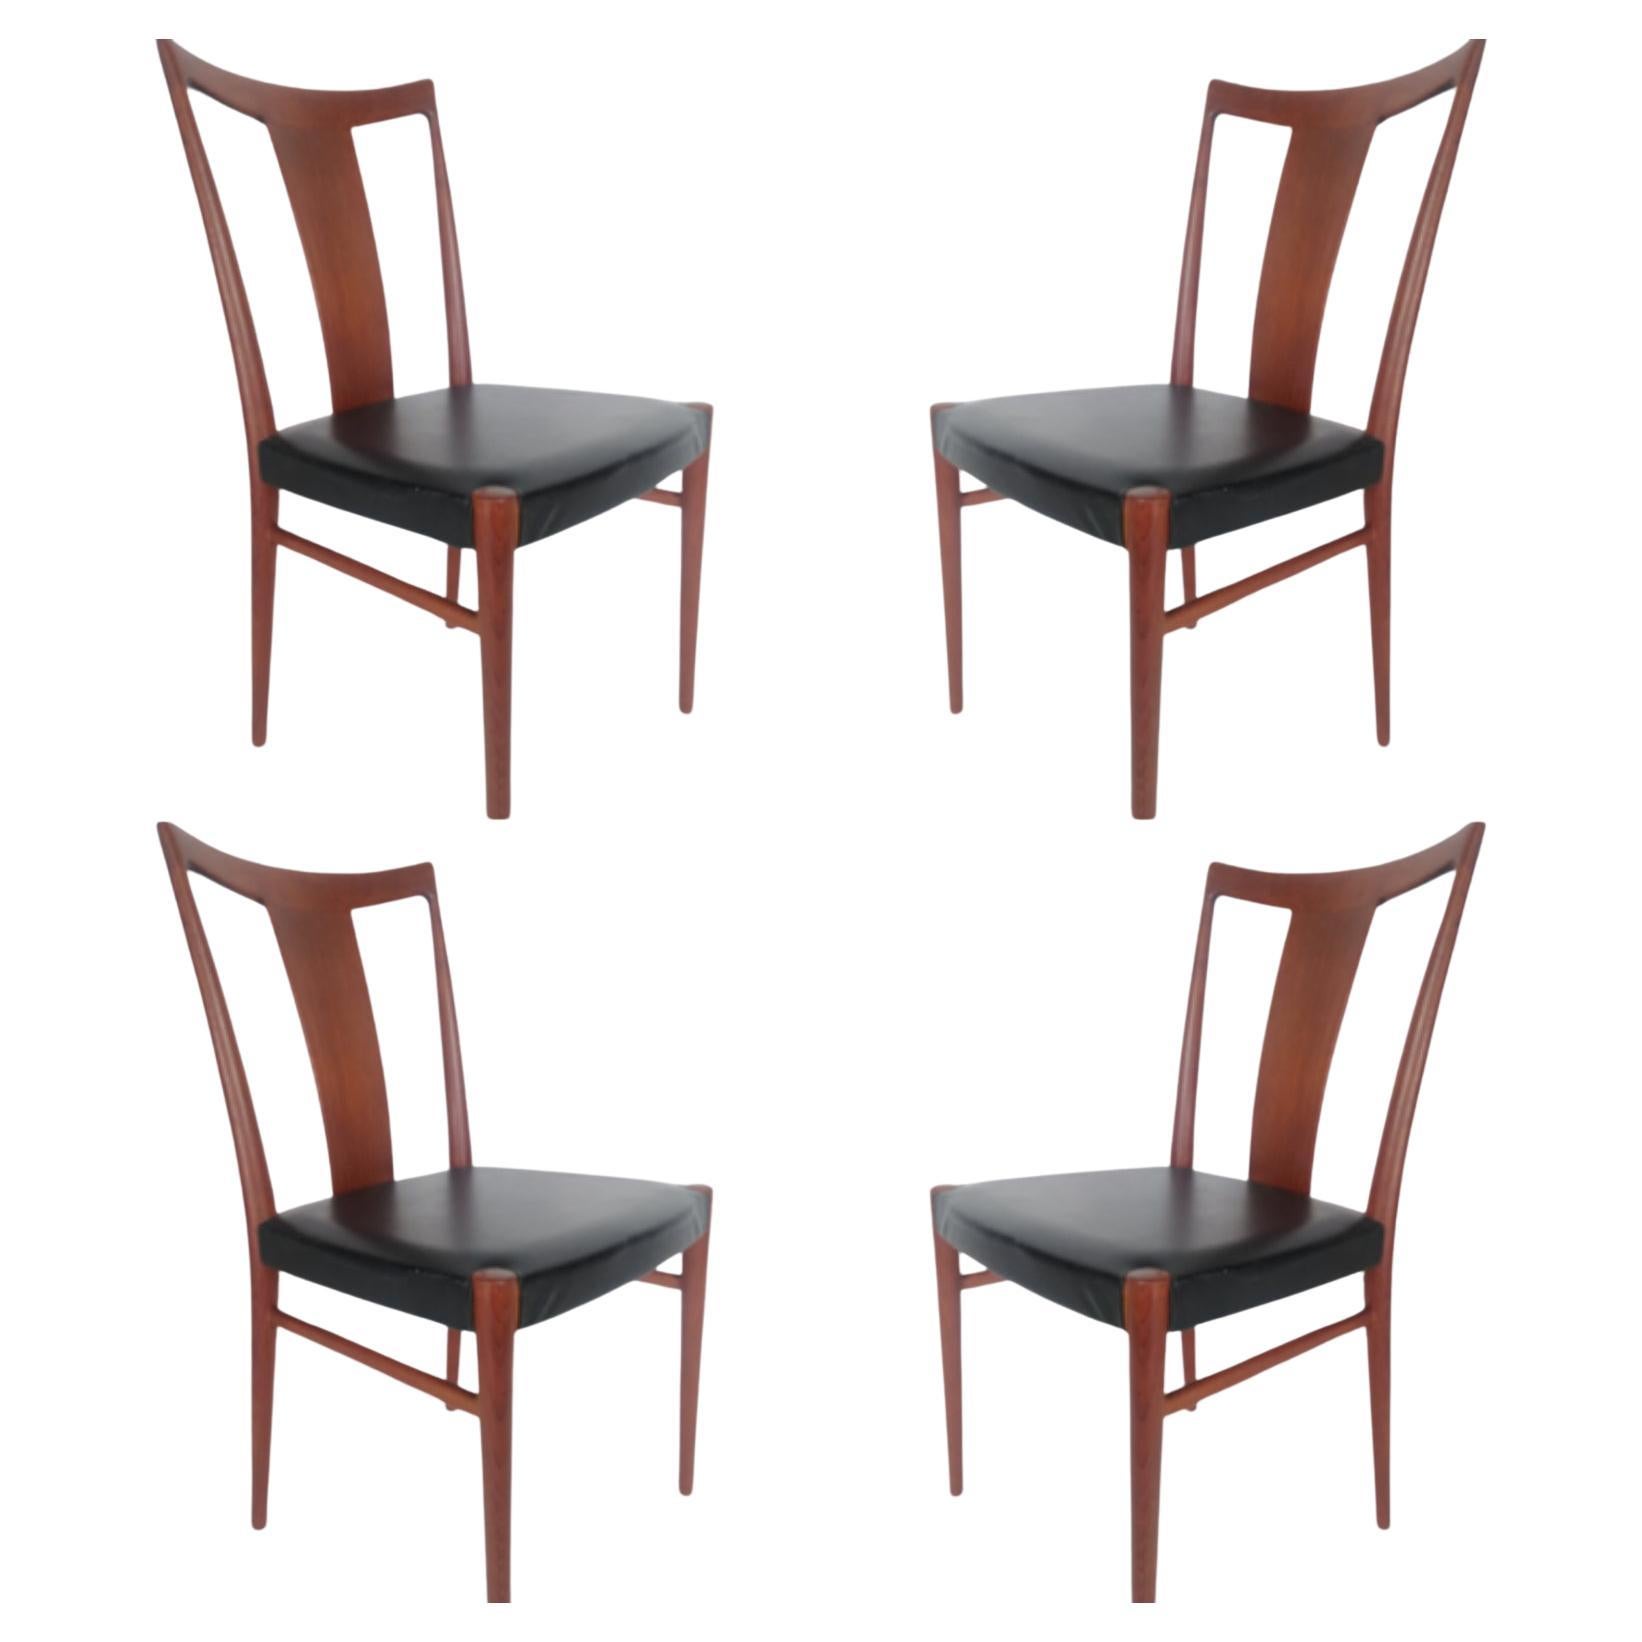 Set of 6 elegant and sophisticated Teak dining chairs
from Denmark, circa 1958.
They are all in very good original condition with no damage nor repairs.
 